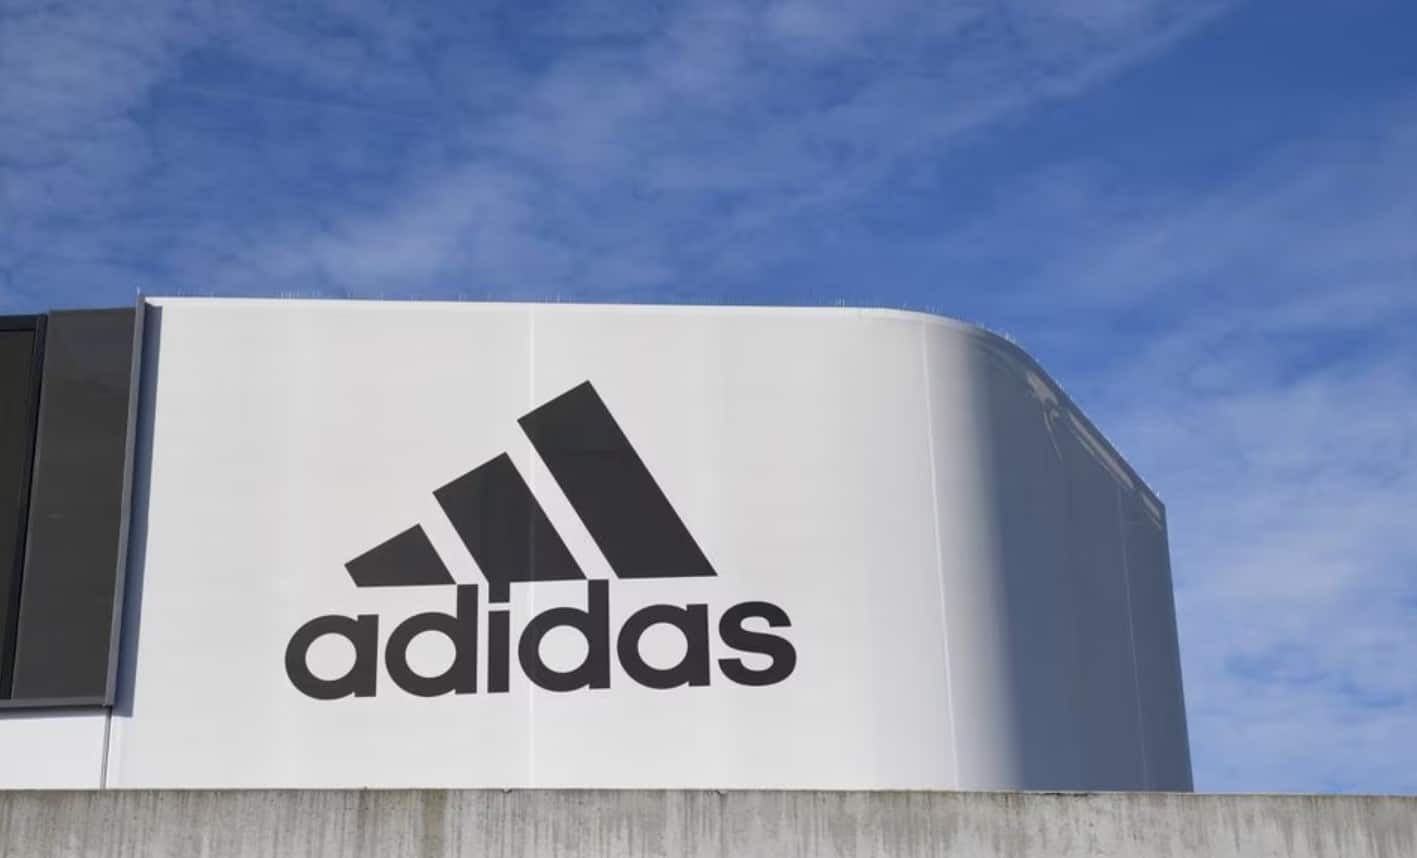 image Manchester United renews Adidas partnership in $1.1 bln 10-yr deal